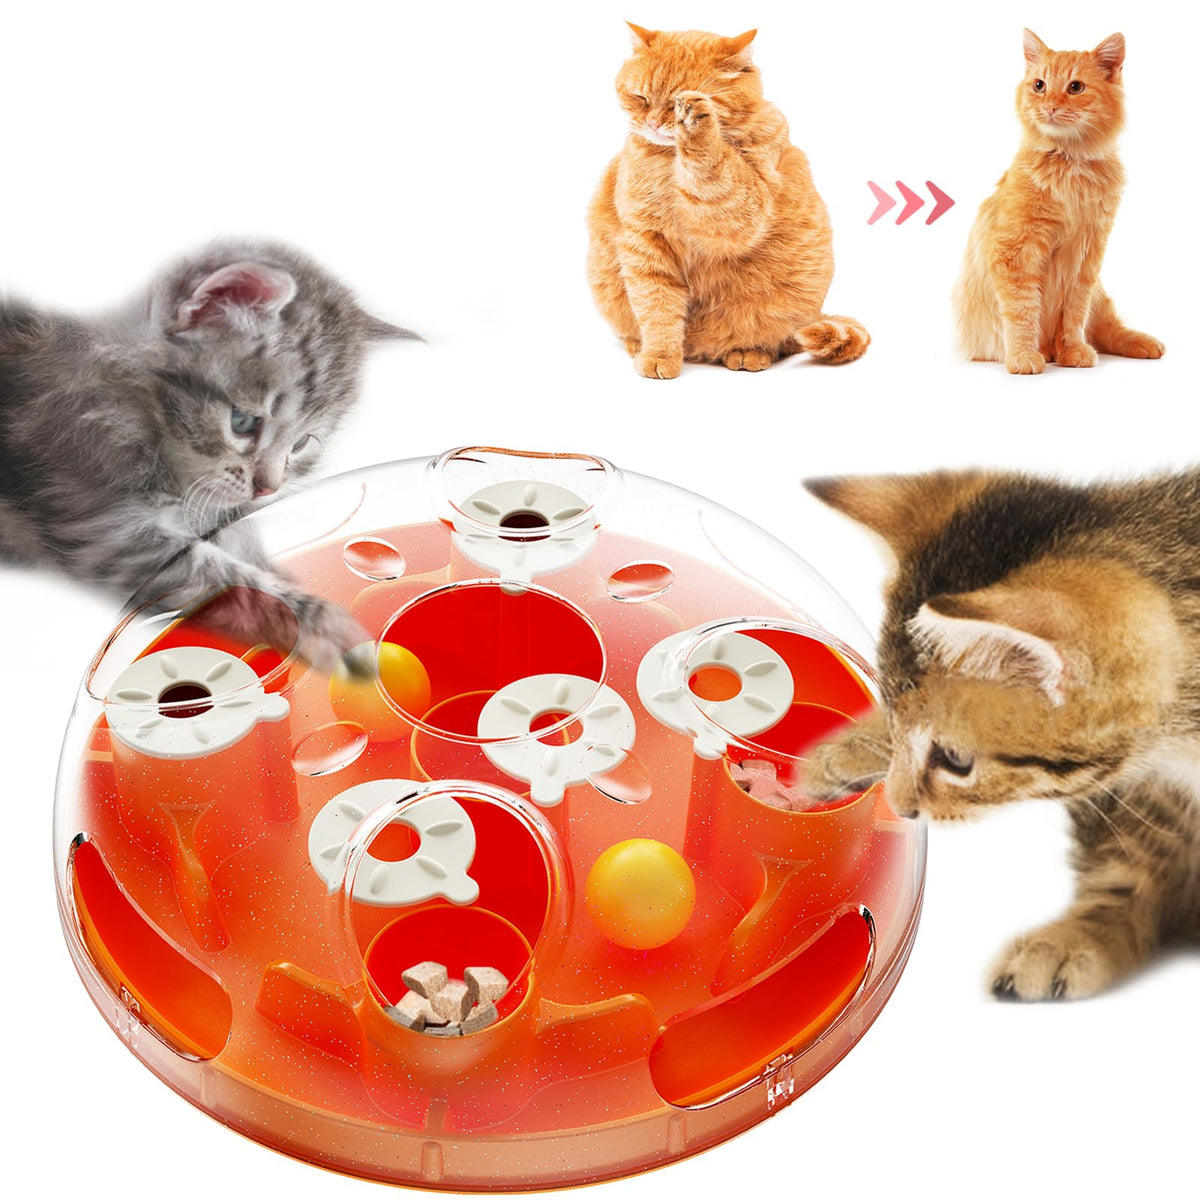 TACKDG Cat Puzzles Toy Indoor for Cats Weight Loss Interactive Toys Kitten Slow Feeder Kitty Food Treat Puzzles Feeding Dispenser Brian Stimulation Track Balls Pet Fun Birthdat Gift